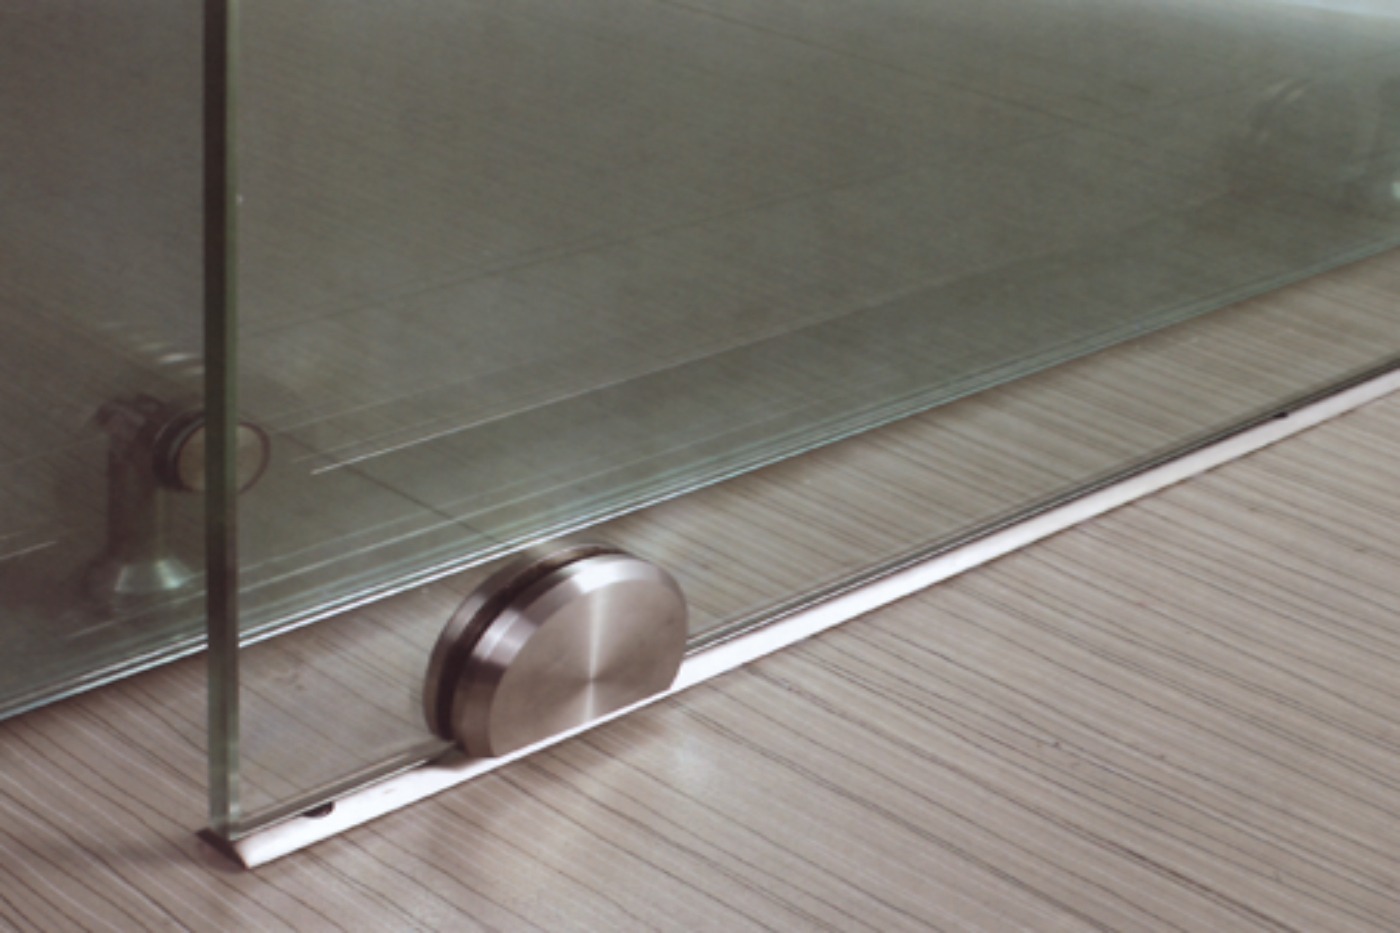 Understanding Glass Products We Sell and Install Here at A Cutting Edge Glass & Mirror